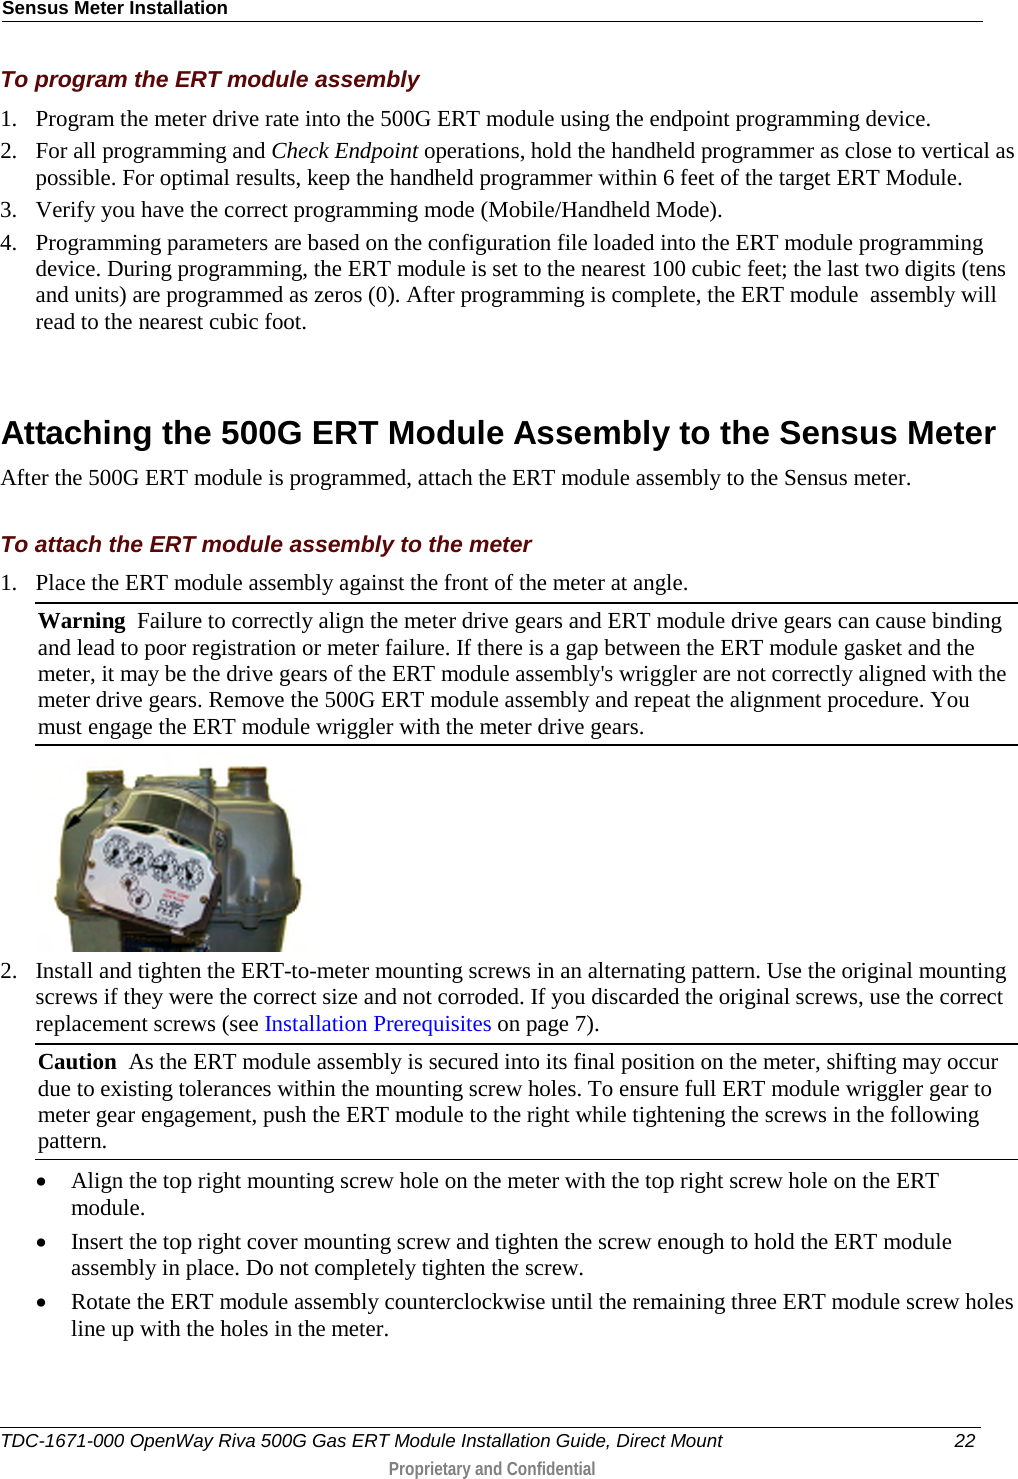 Sensus Meter Installation  To program the ERT module assembly 1. Program the meter drive rate into the 500G ERT module using the endpoint programming device.  2. For all programming and Check Endpoint operations, hold the handheld programmer as close to vertical as possible. For optimal results, keep the handheld programmer within 6 feet of the target ERT Module.  3. Verify you have the correct programming mode (Mobile/Handheld Mode).  4. Programming parameters are based on the configuration file loaded into the ERT module programming device. During programming, the ERT module is set to the nearest 100 cubic feet; the last two digits (tens and units) are programmed as zeros (0). After programming is complete, the ERT module  assembly will read to the nearest cubic foot.    Attaching the 500G ERT Module Assembly to the Sensus Meter After the 500G ERT module is programmed, attach the ERT module assembly to the Sensus meter.  To attach the ERT module assembly to the meter 1. Place the ERT module assembly against the front of the meter at angle.  Warning  Failure to correctly align the meter drive gears and ERT module drive gears can cause binding and lead to poor registration or meter failure. If there is a gap between the ERT module gasket and the meter, it may be the drive gears of the ERT module assembly&apos;s wriggler are not correctly aligned with the meter drive gears. Remove the 500G ERT module assembly and repeat the alignment procedure. You must engage the ERT module wriggler with the meter drive gears.   2. Install and tighten the ERT-to-meter mounting screws in an alternating pattern. Use the original mounting screws if they were the correct size and not corroded. If you discarded the original screws, use the correct replacement screws (see Installation Prerequisites on page 7). Caution  As the ERT module assembly is secured into its final position on the meter, shifting may occur due to existing tolerances within the mounting screw holes. To ensure full ERT module wriggler gear to meter gear engagement, push the ERT module to the right while tightening the screws in the following pattern. • Align the top right mounting screw hole on the meter with the top right screw hole on the ERT module.  • Insert the top right cover mounting screw and tighten the screw enough to hold the ERT module assembly in place. Do not completely tighten the screw.  • Rotate the ERT module assembly counterclockwise until the remaining three ERT module screw holes line up with the holes in the meter.   TDC-1671-000 OpenWay Riva 500G Gas ERT Module Installation Guide, Direct Mount 22  Proprietary and Confidential    